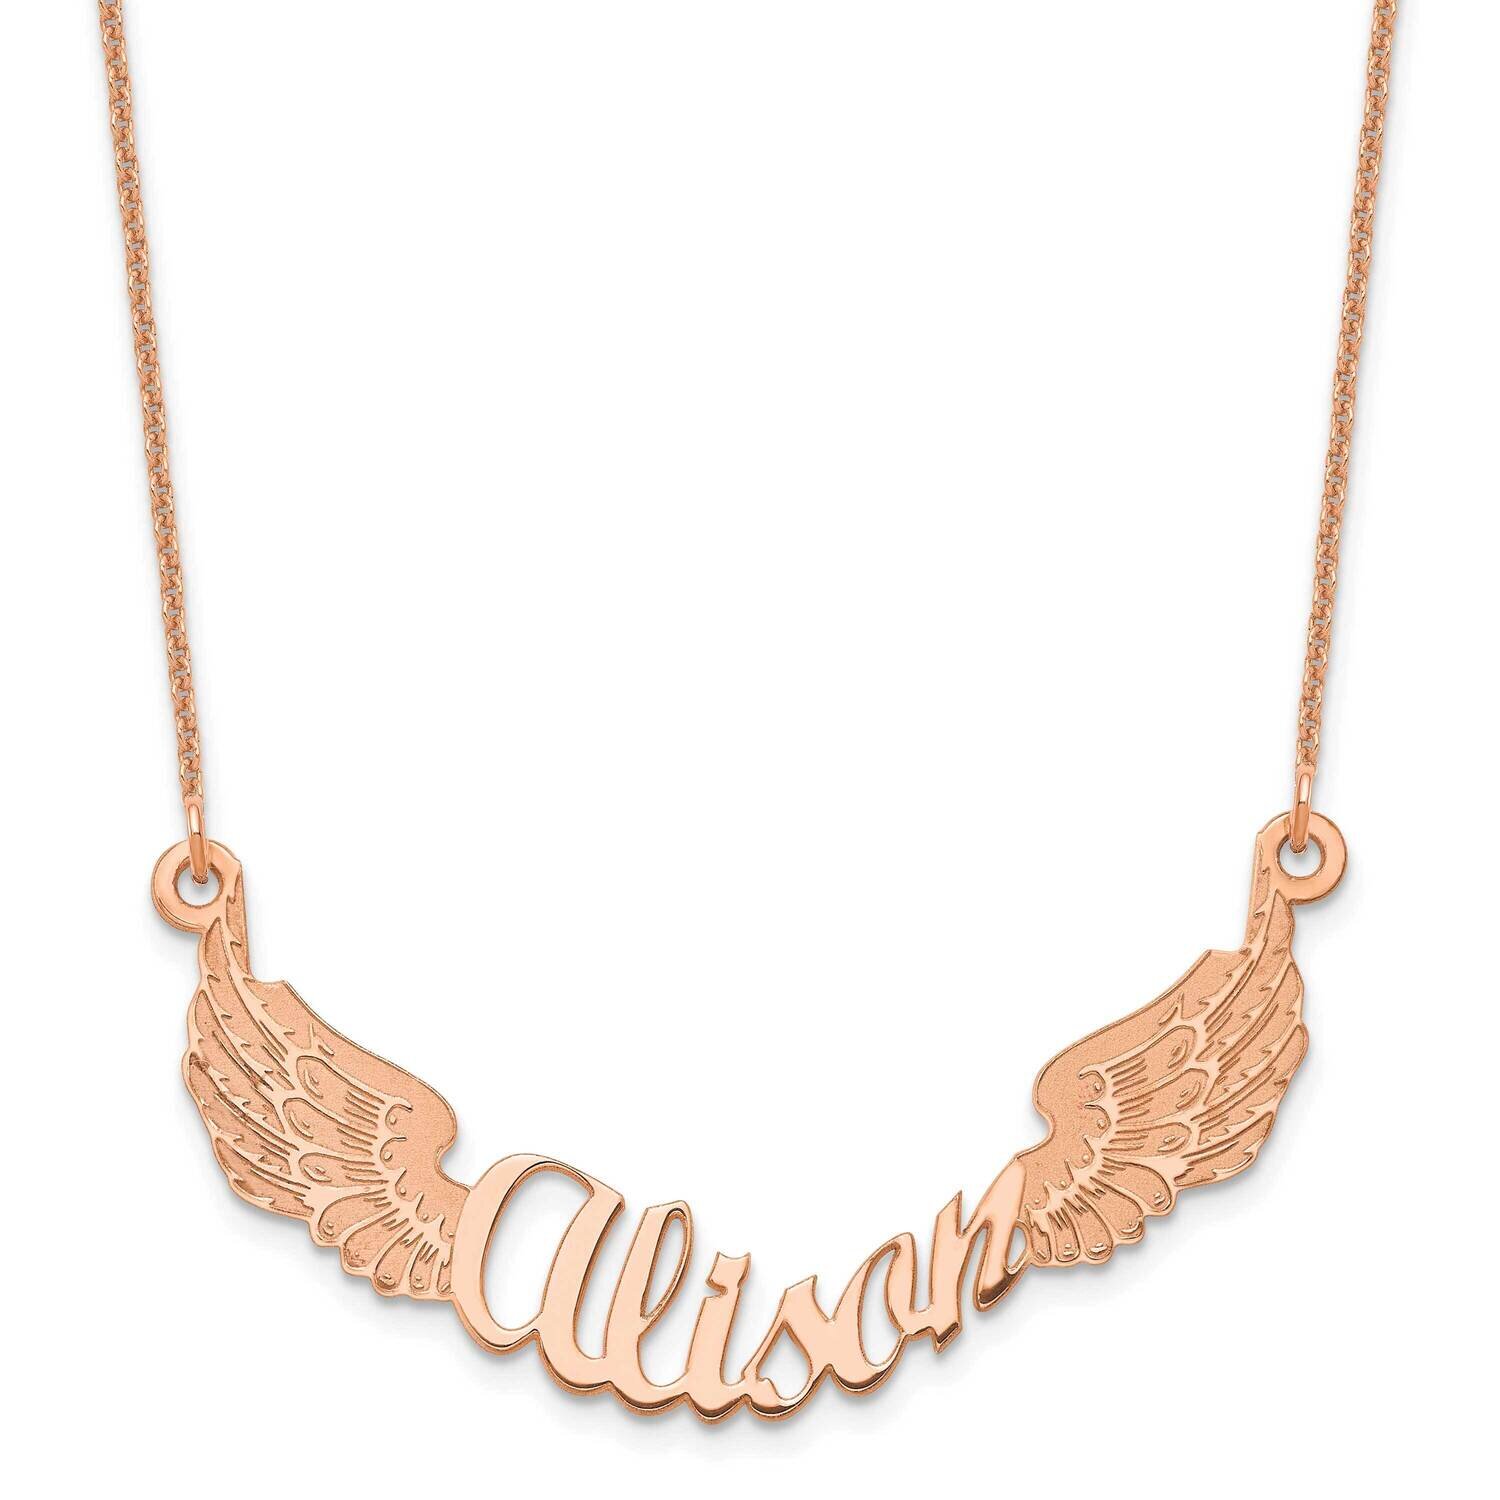 Personalized Angel Wings Necklace 14k Rose Gold XNA964R